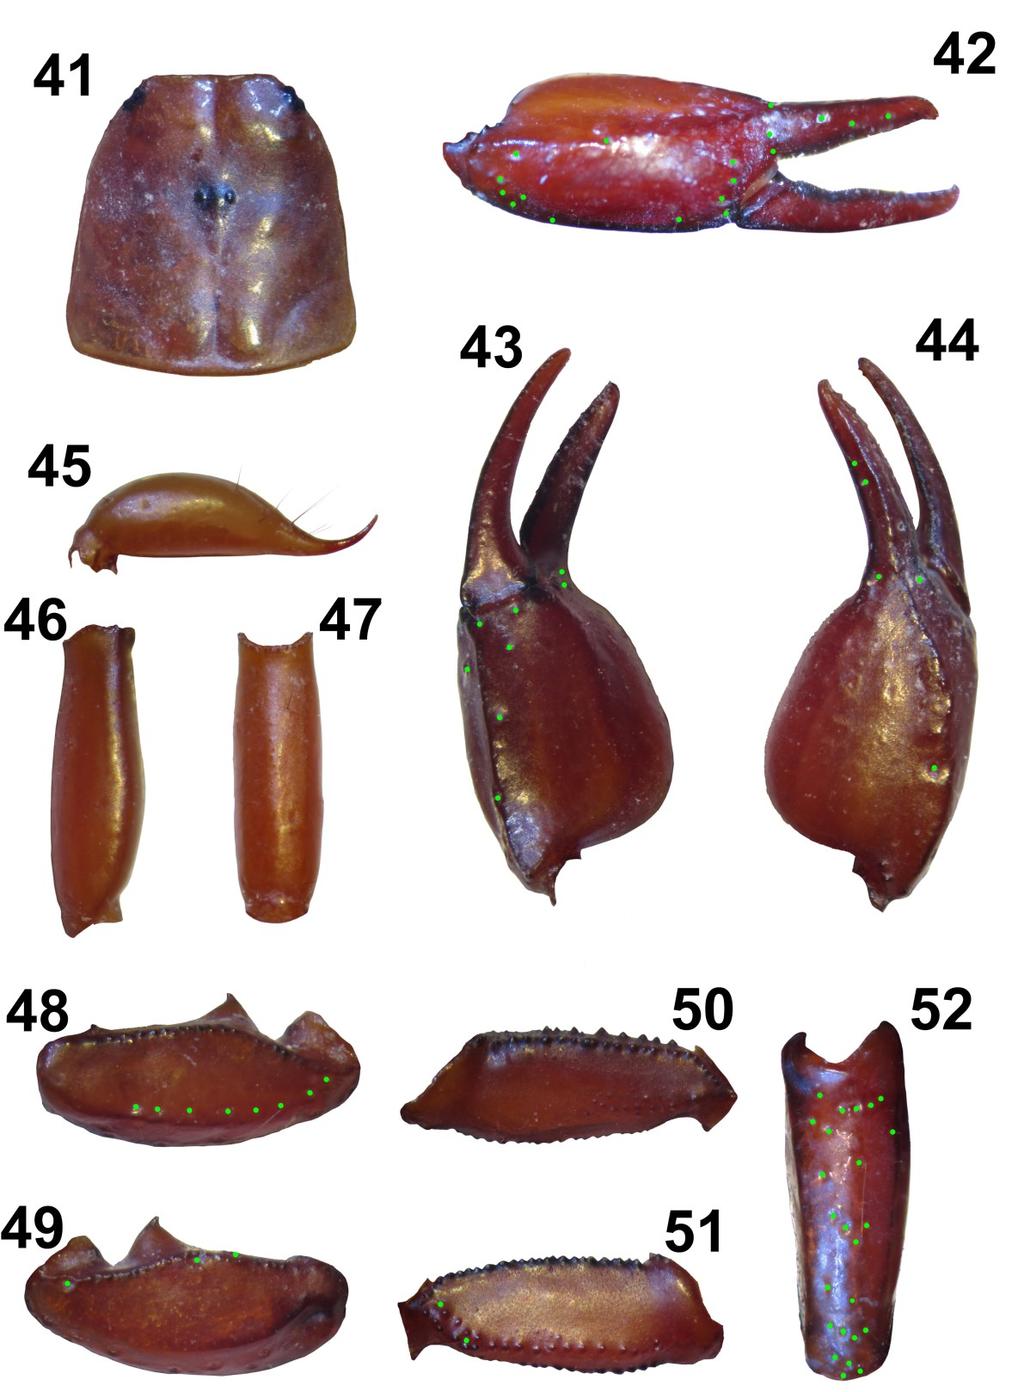 Tropea et al.: Three New Euscorpius From Greece 15 Figures 41 52: Euscorpius vignai sp. n. 41. Carapace. 42. External view of the chela of adult female. 43. Ventral view of the chela. 44.